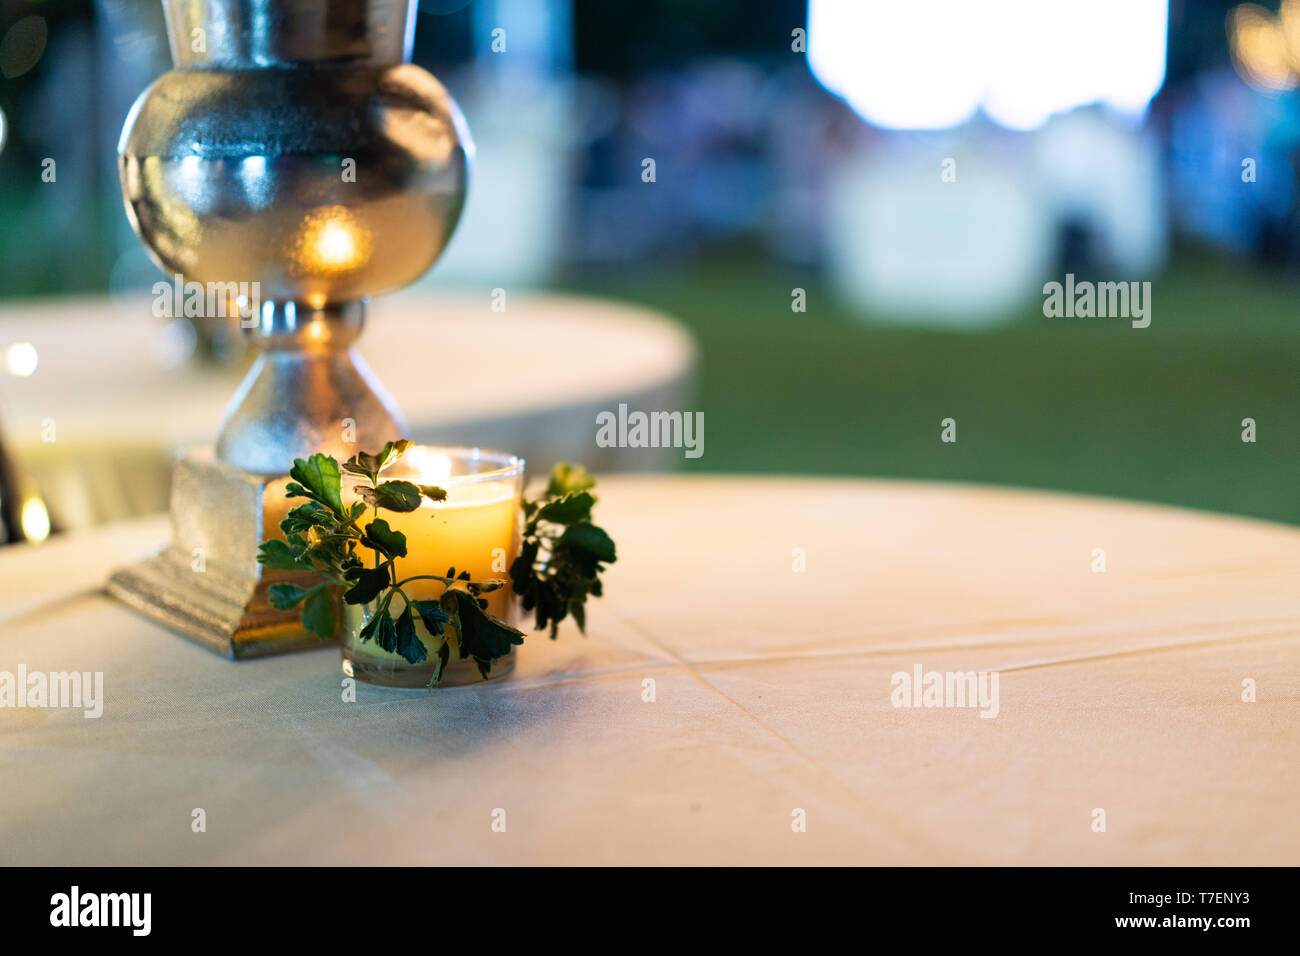 Little cozy candle on the white circle table with blur background. Stock Photo